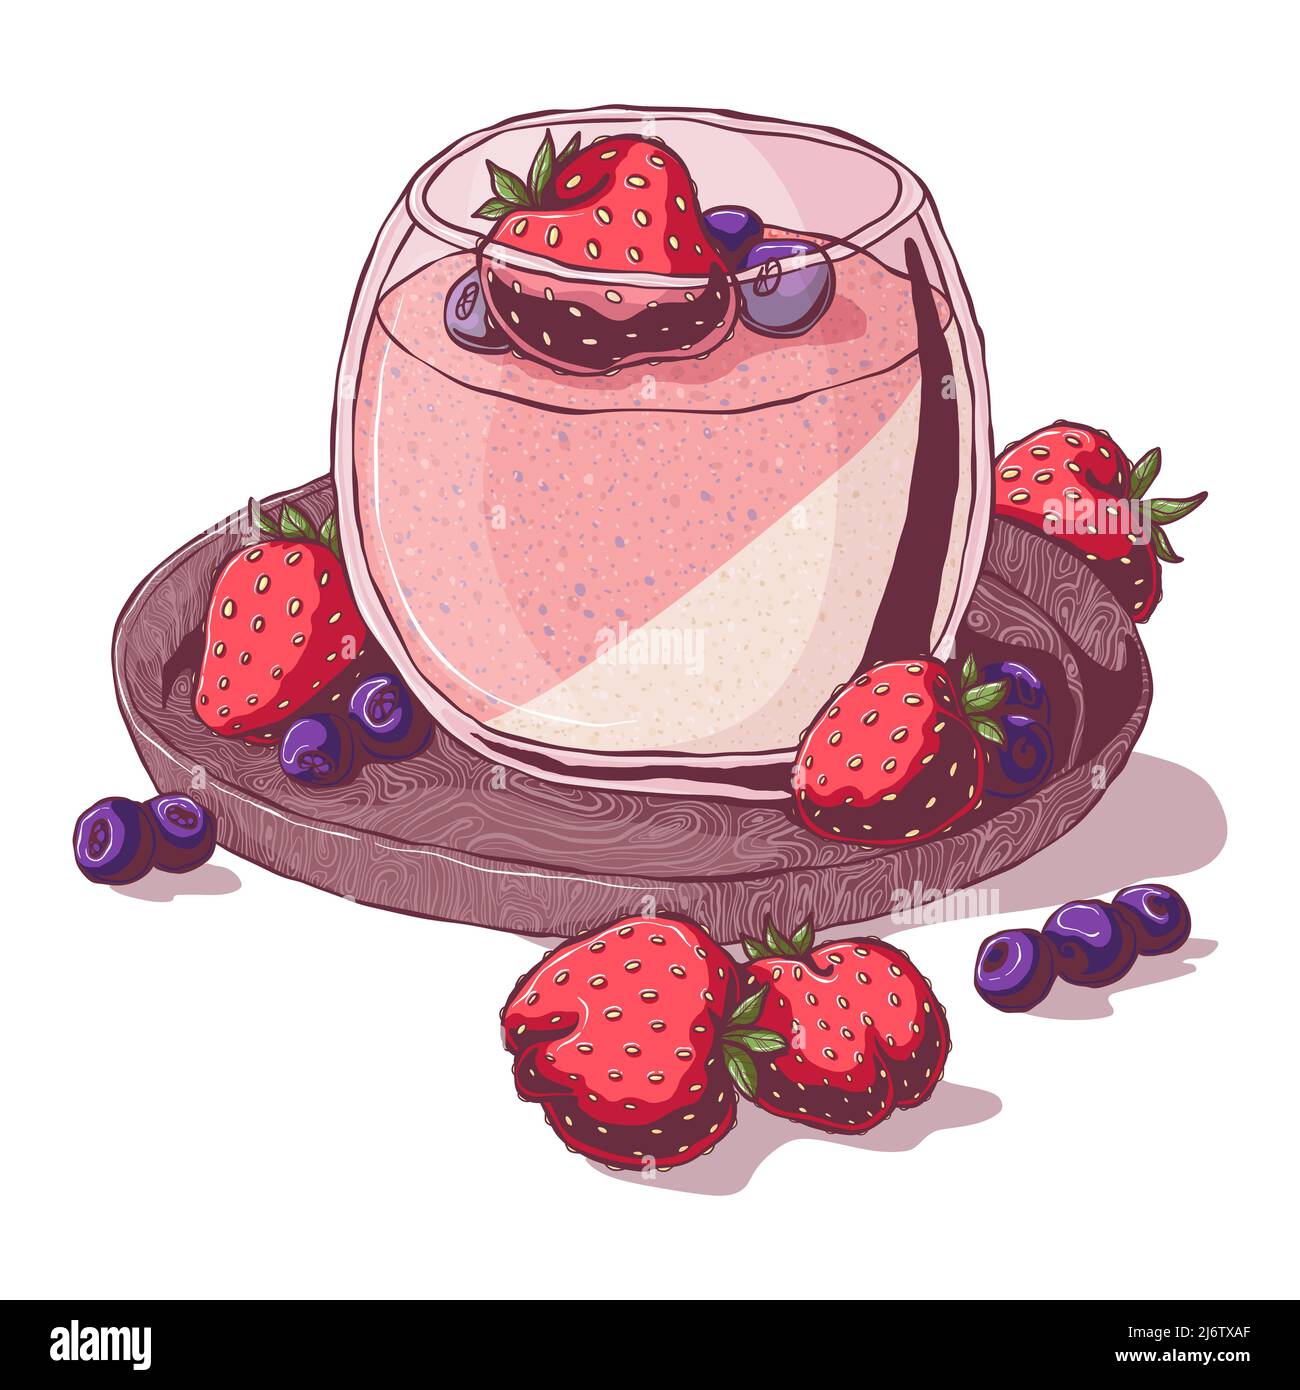 Panna cotta with strawberry and blueberry. Hand drawn vector illustration in cartoon style. Isolated on white background. Italian dessert. Stock Vector